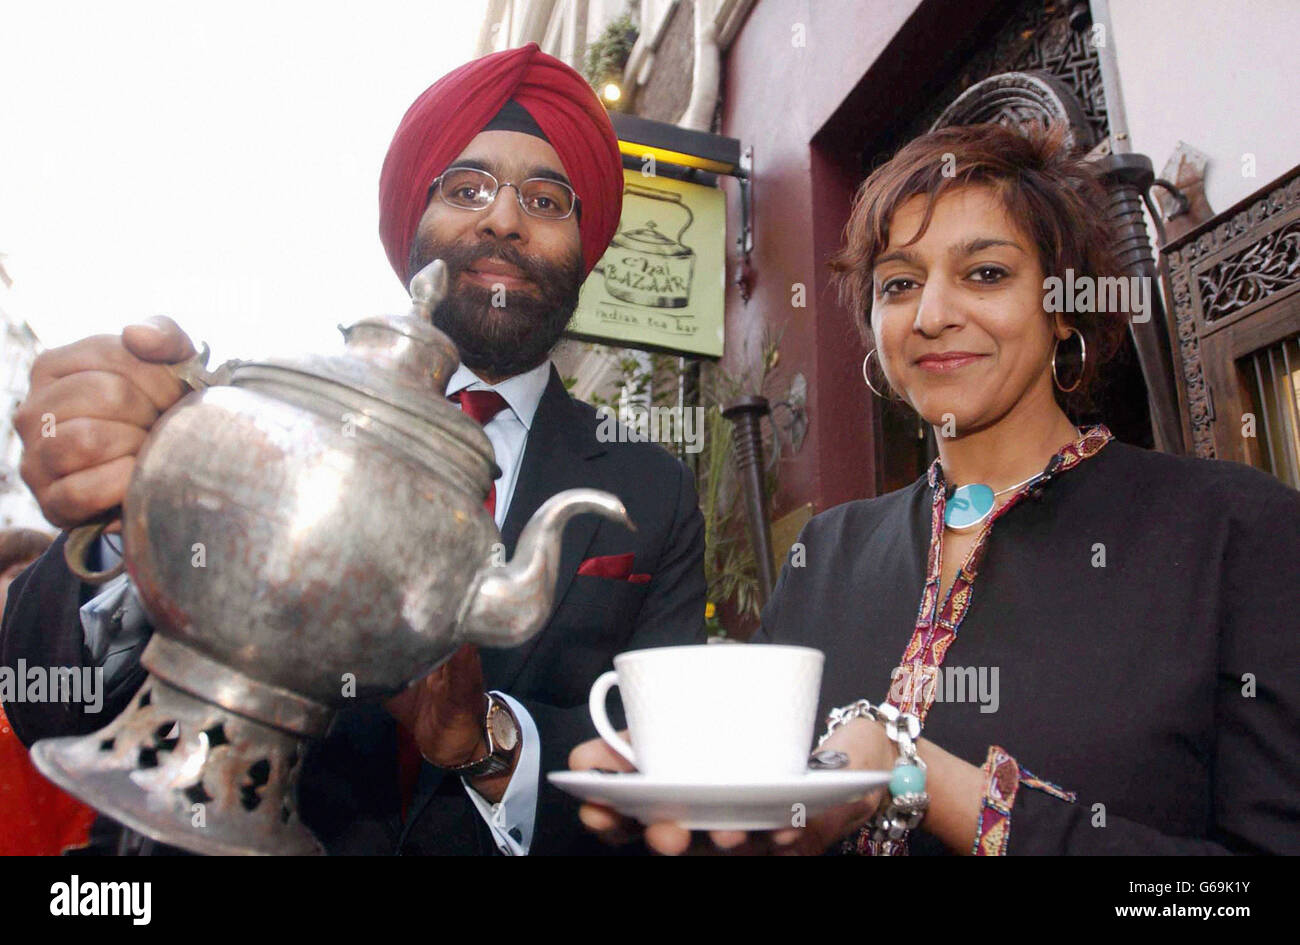 Actress Meera Syal, accompanied by Jagmohan Singh Raju, Director of Tea Board India, during a photocall to launch 'Chai Bazaar', an authentic Indian tea bar in London. Stock Photo